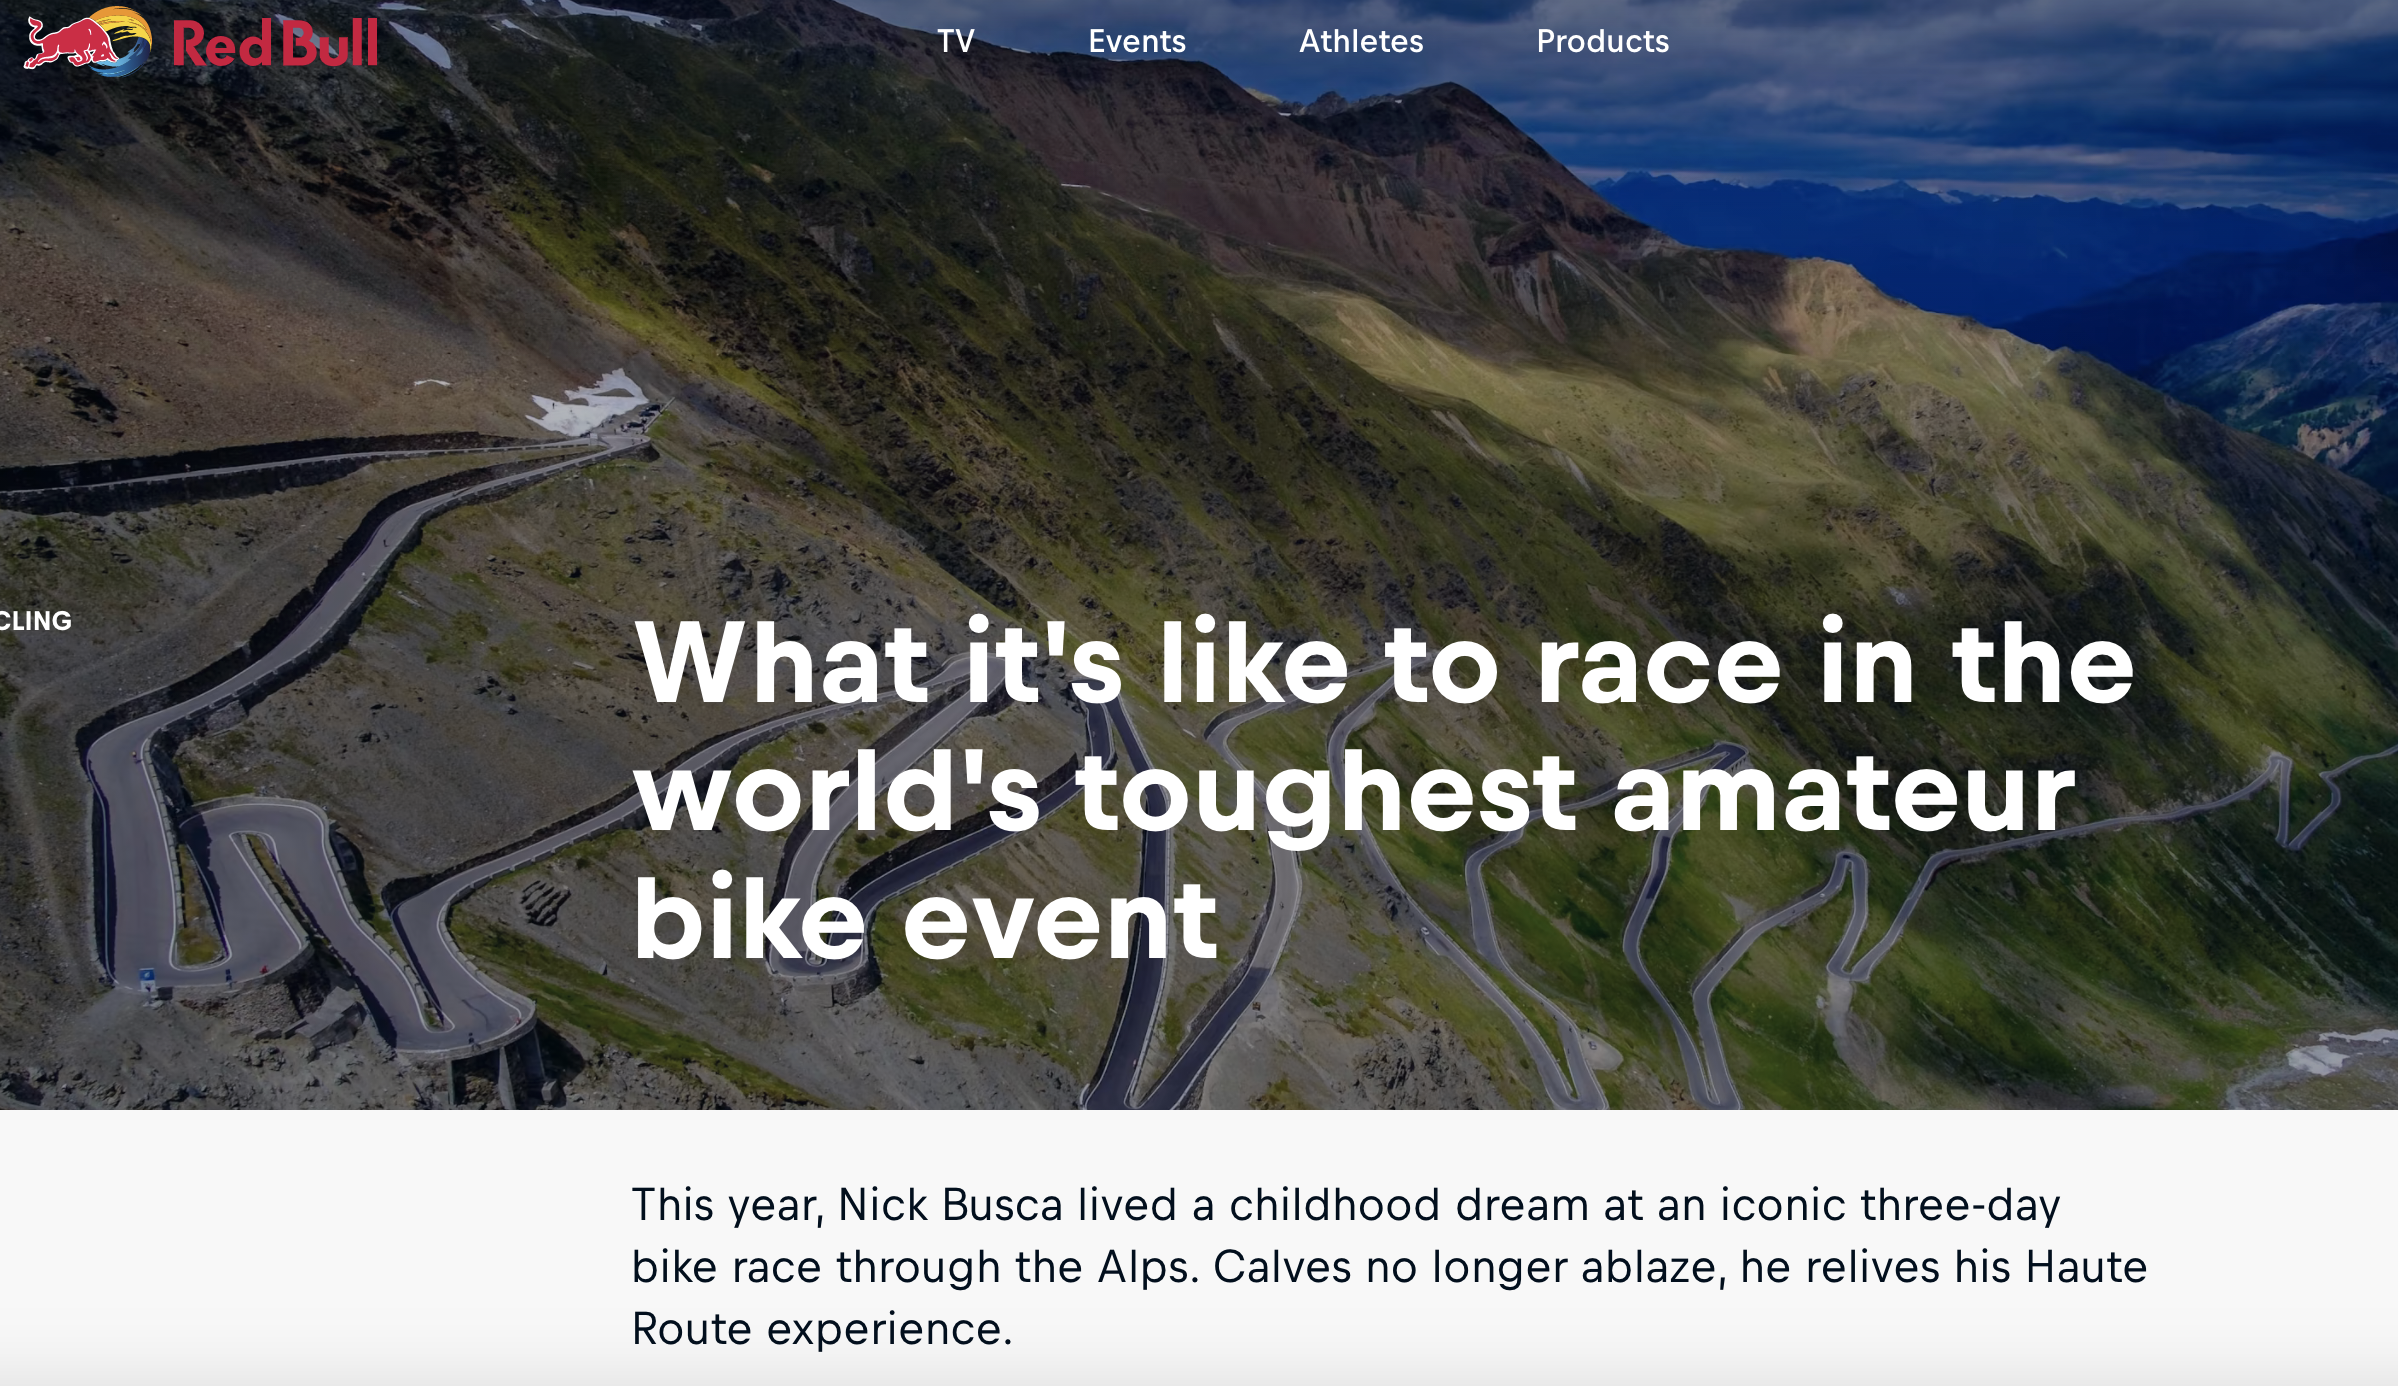 What it's like to race in the world's toughest amateur bike event